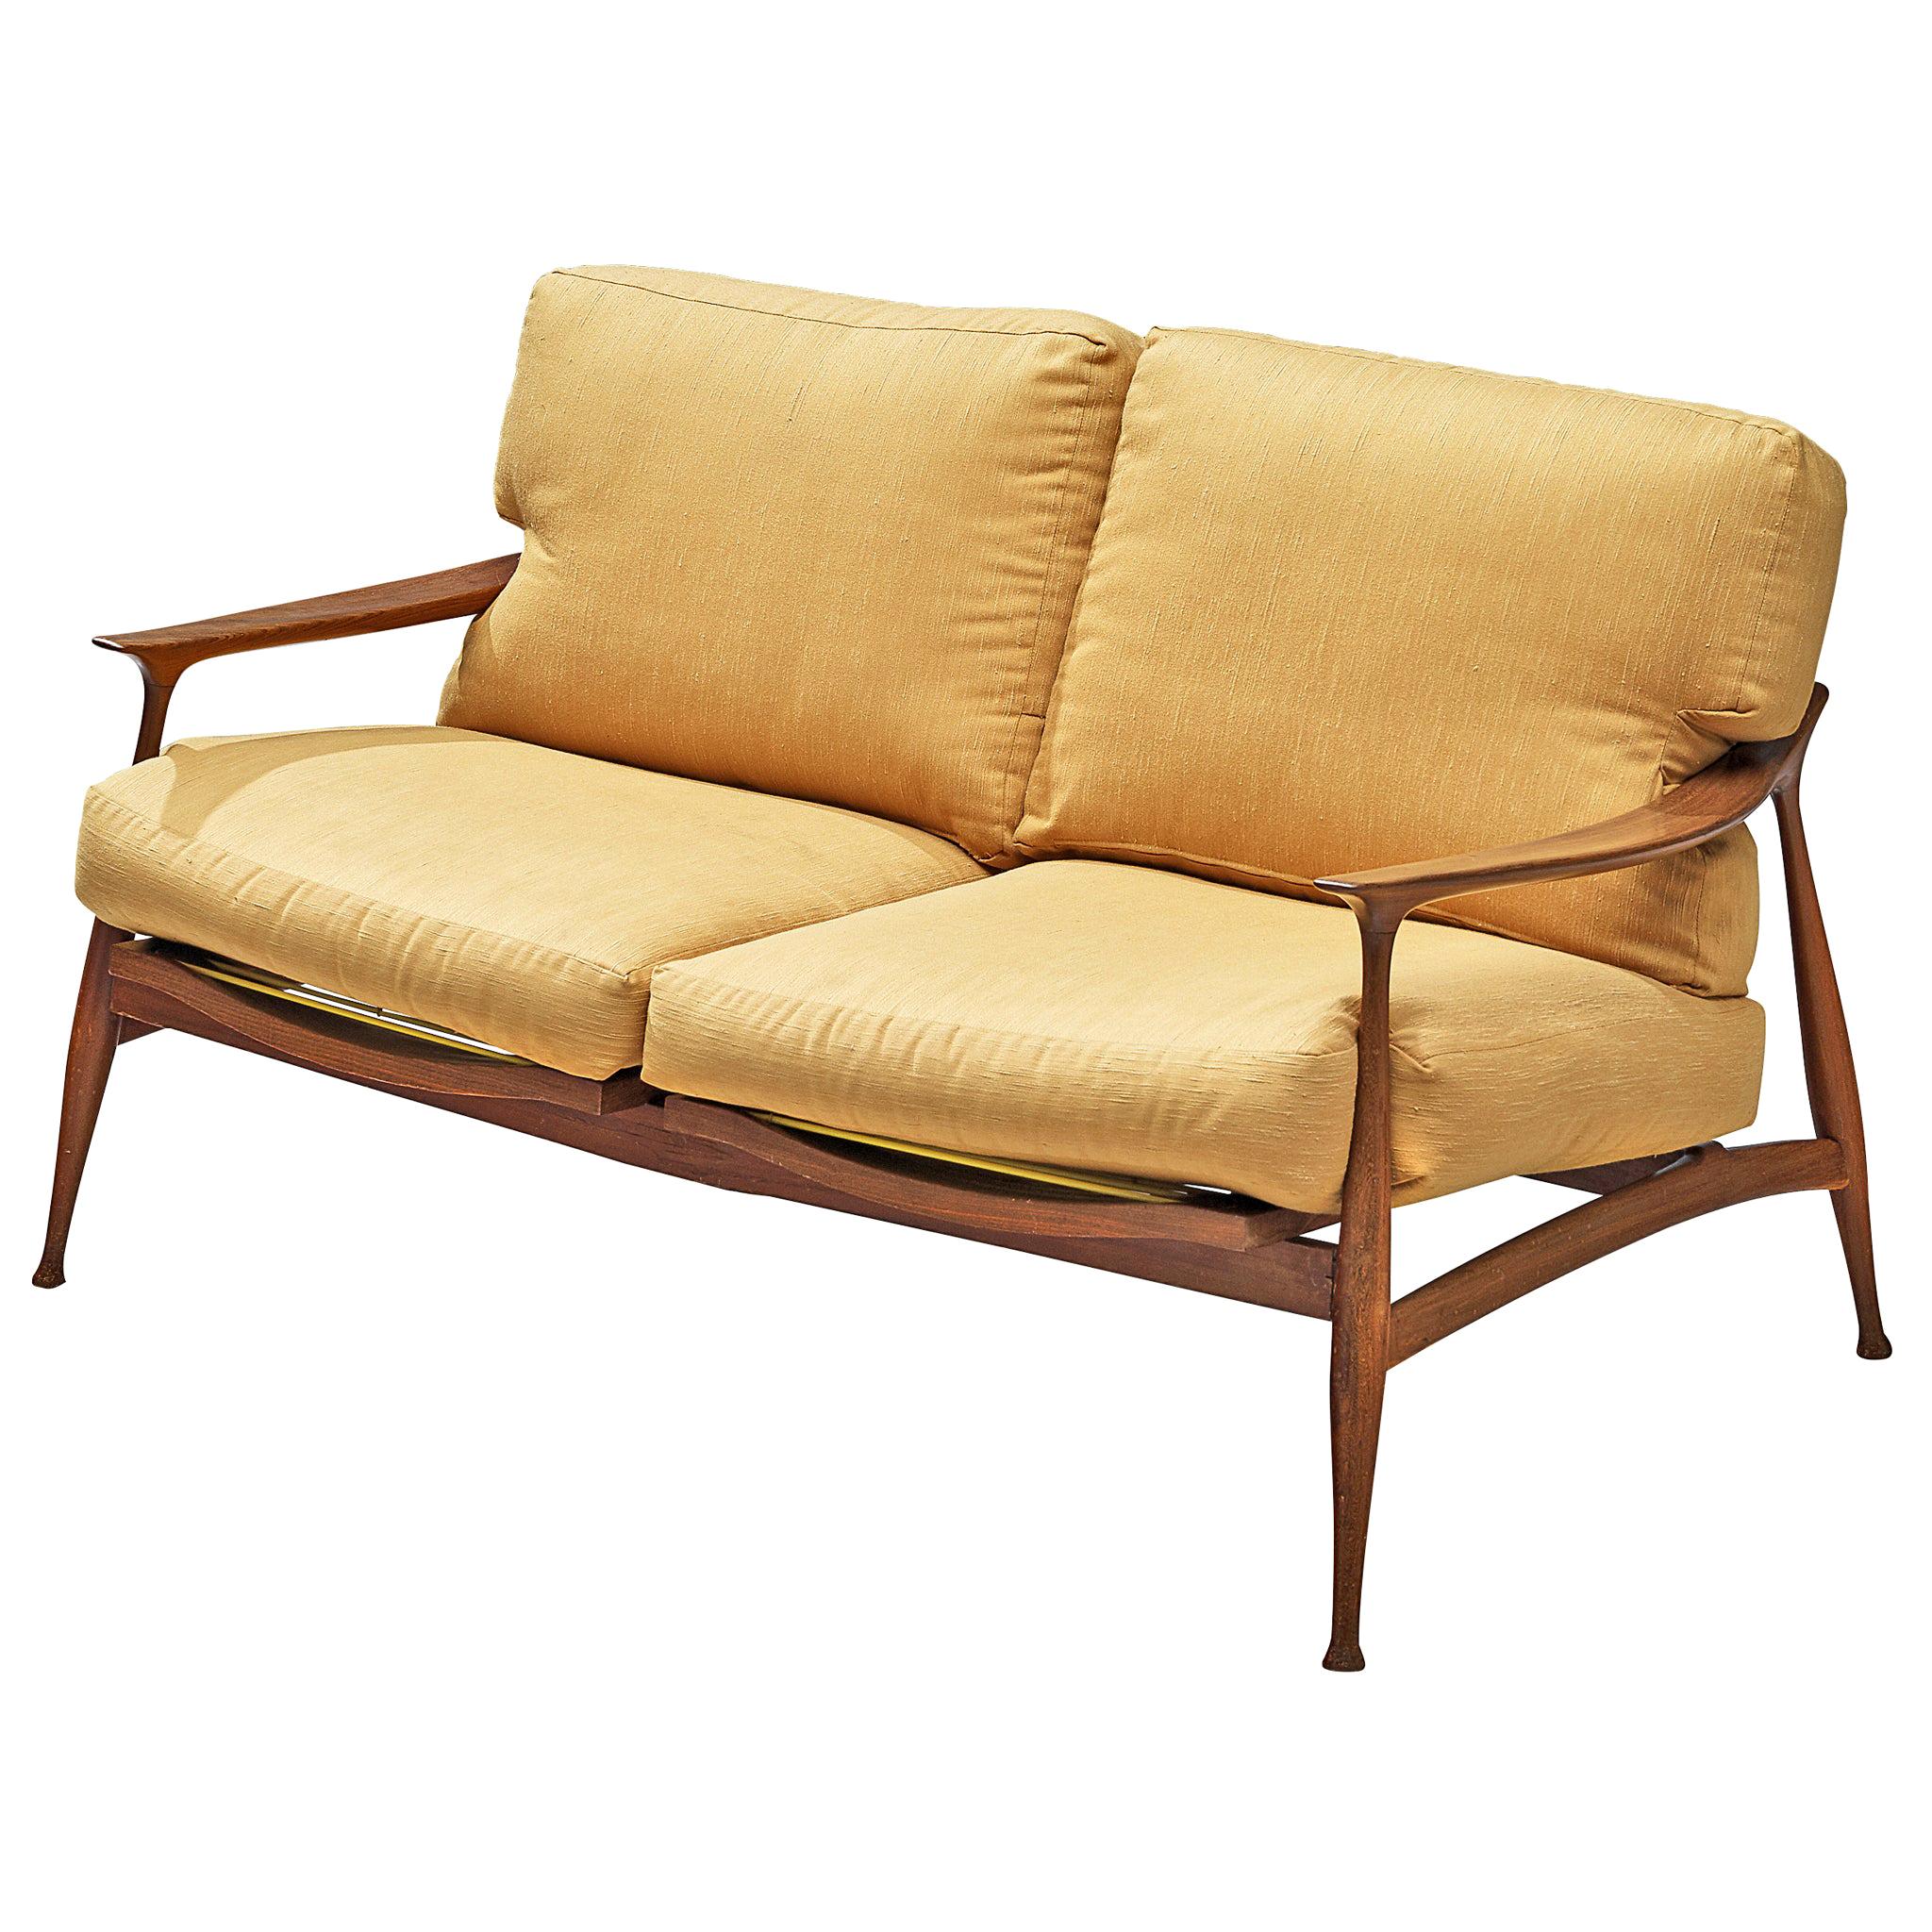 Fratelli Reguitti Sofa Model 'Lord' in Walnut and Yellow Fabric Upholstery